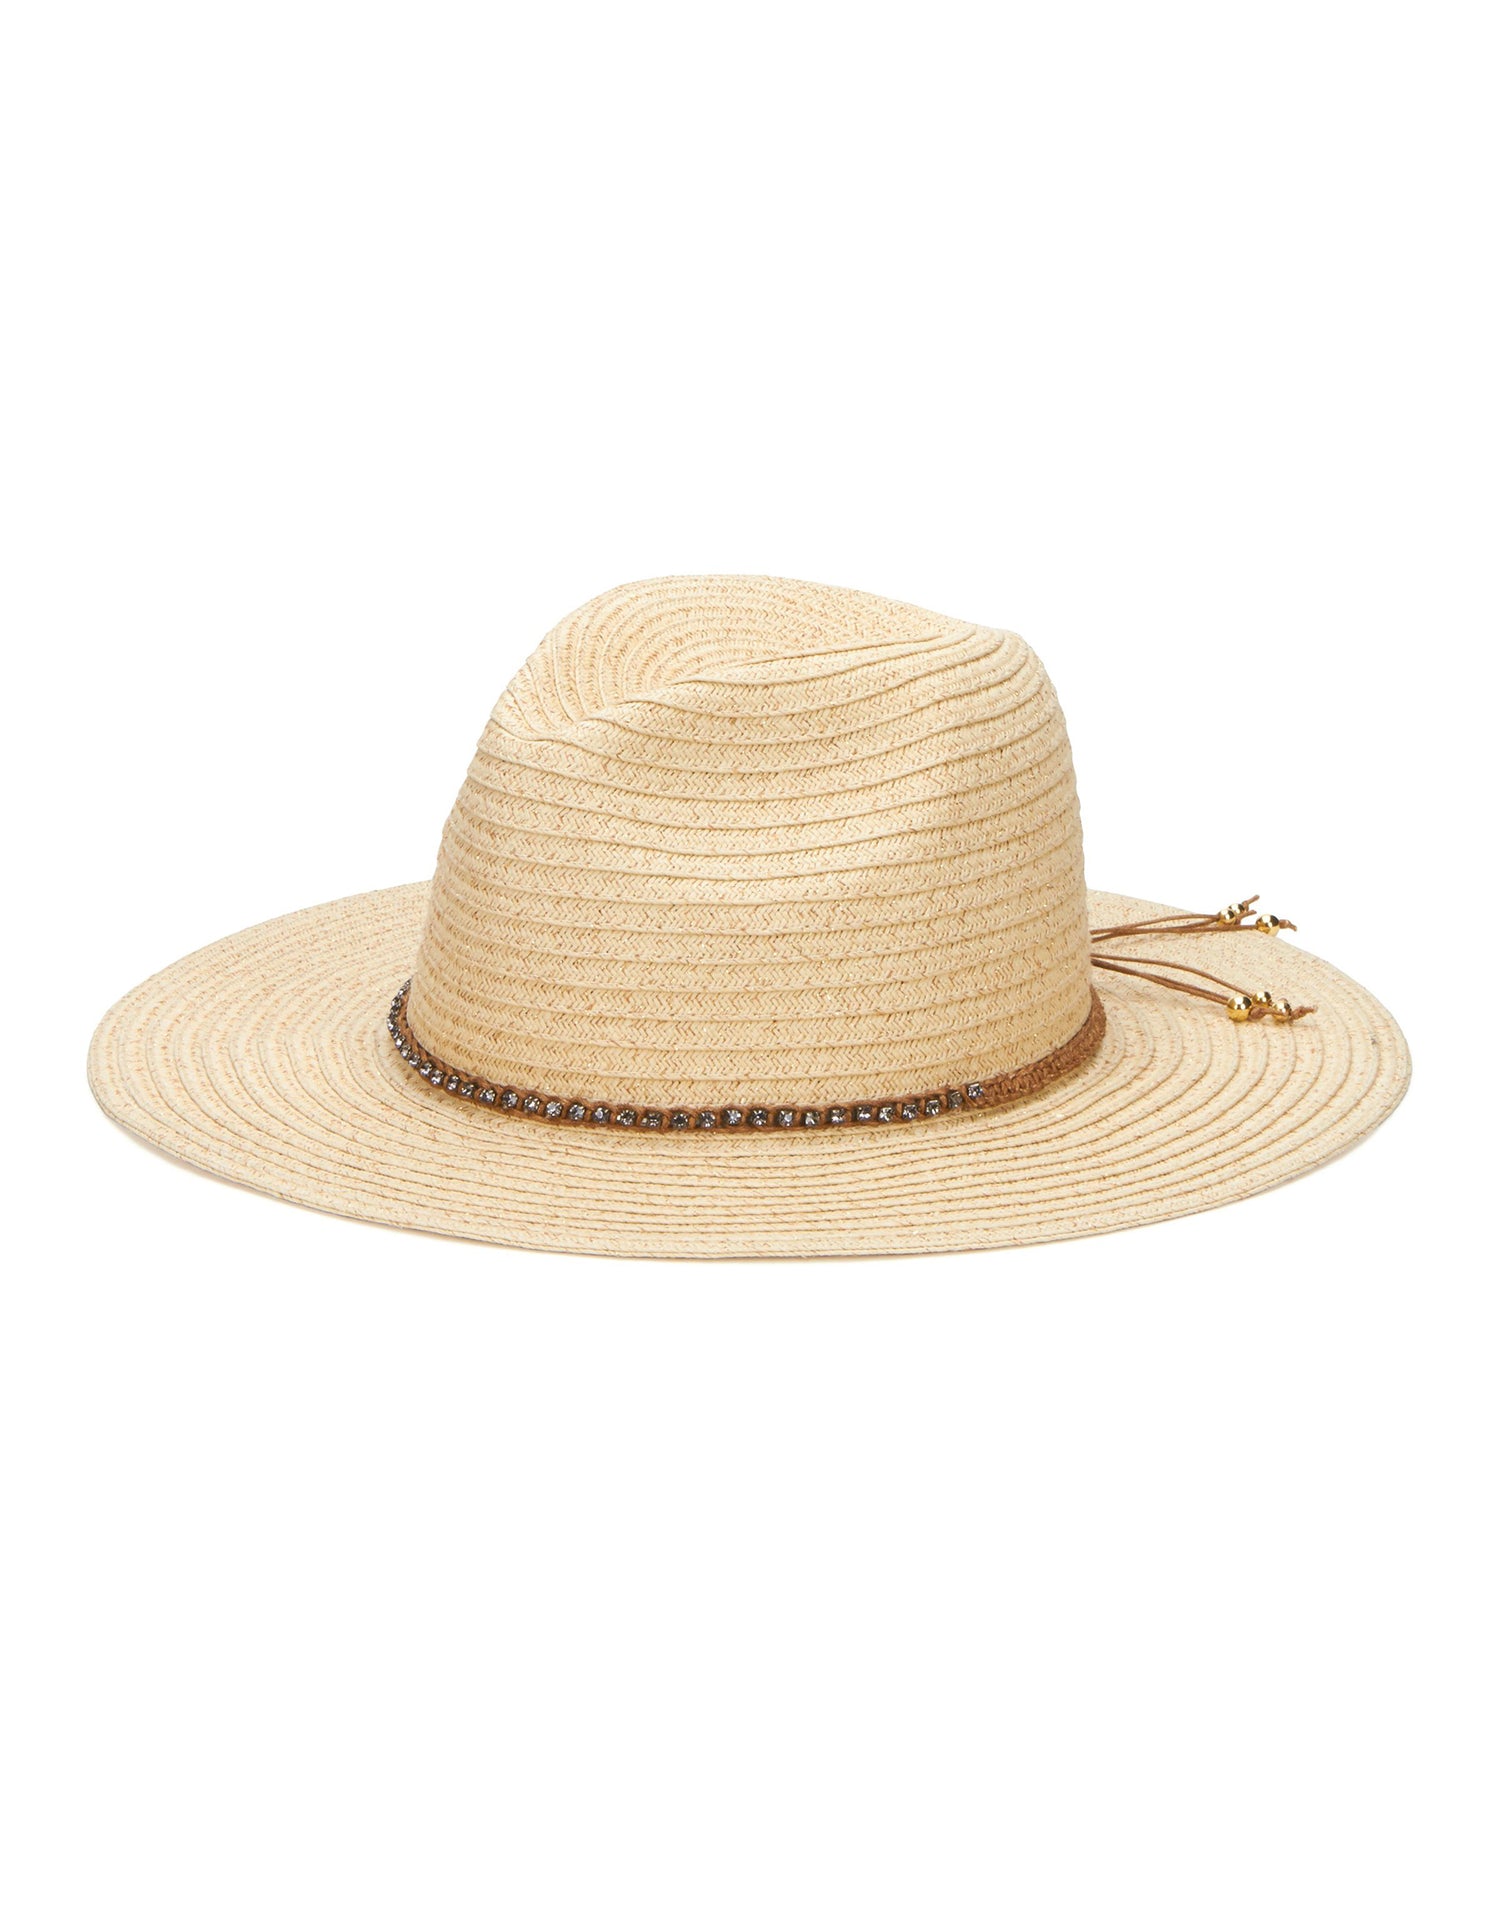 Paperbraid Panama Fedora with Braided Diamond Band in Natural by San Diego Hat Company - Product View